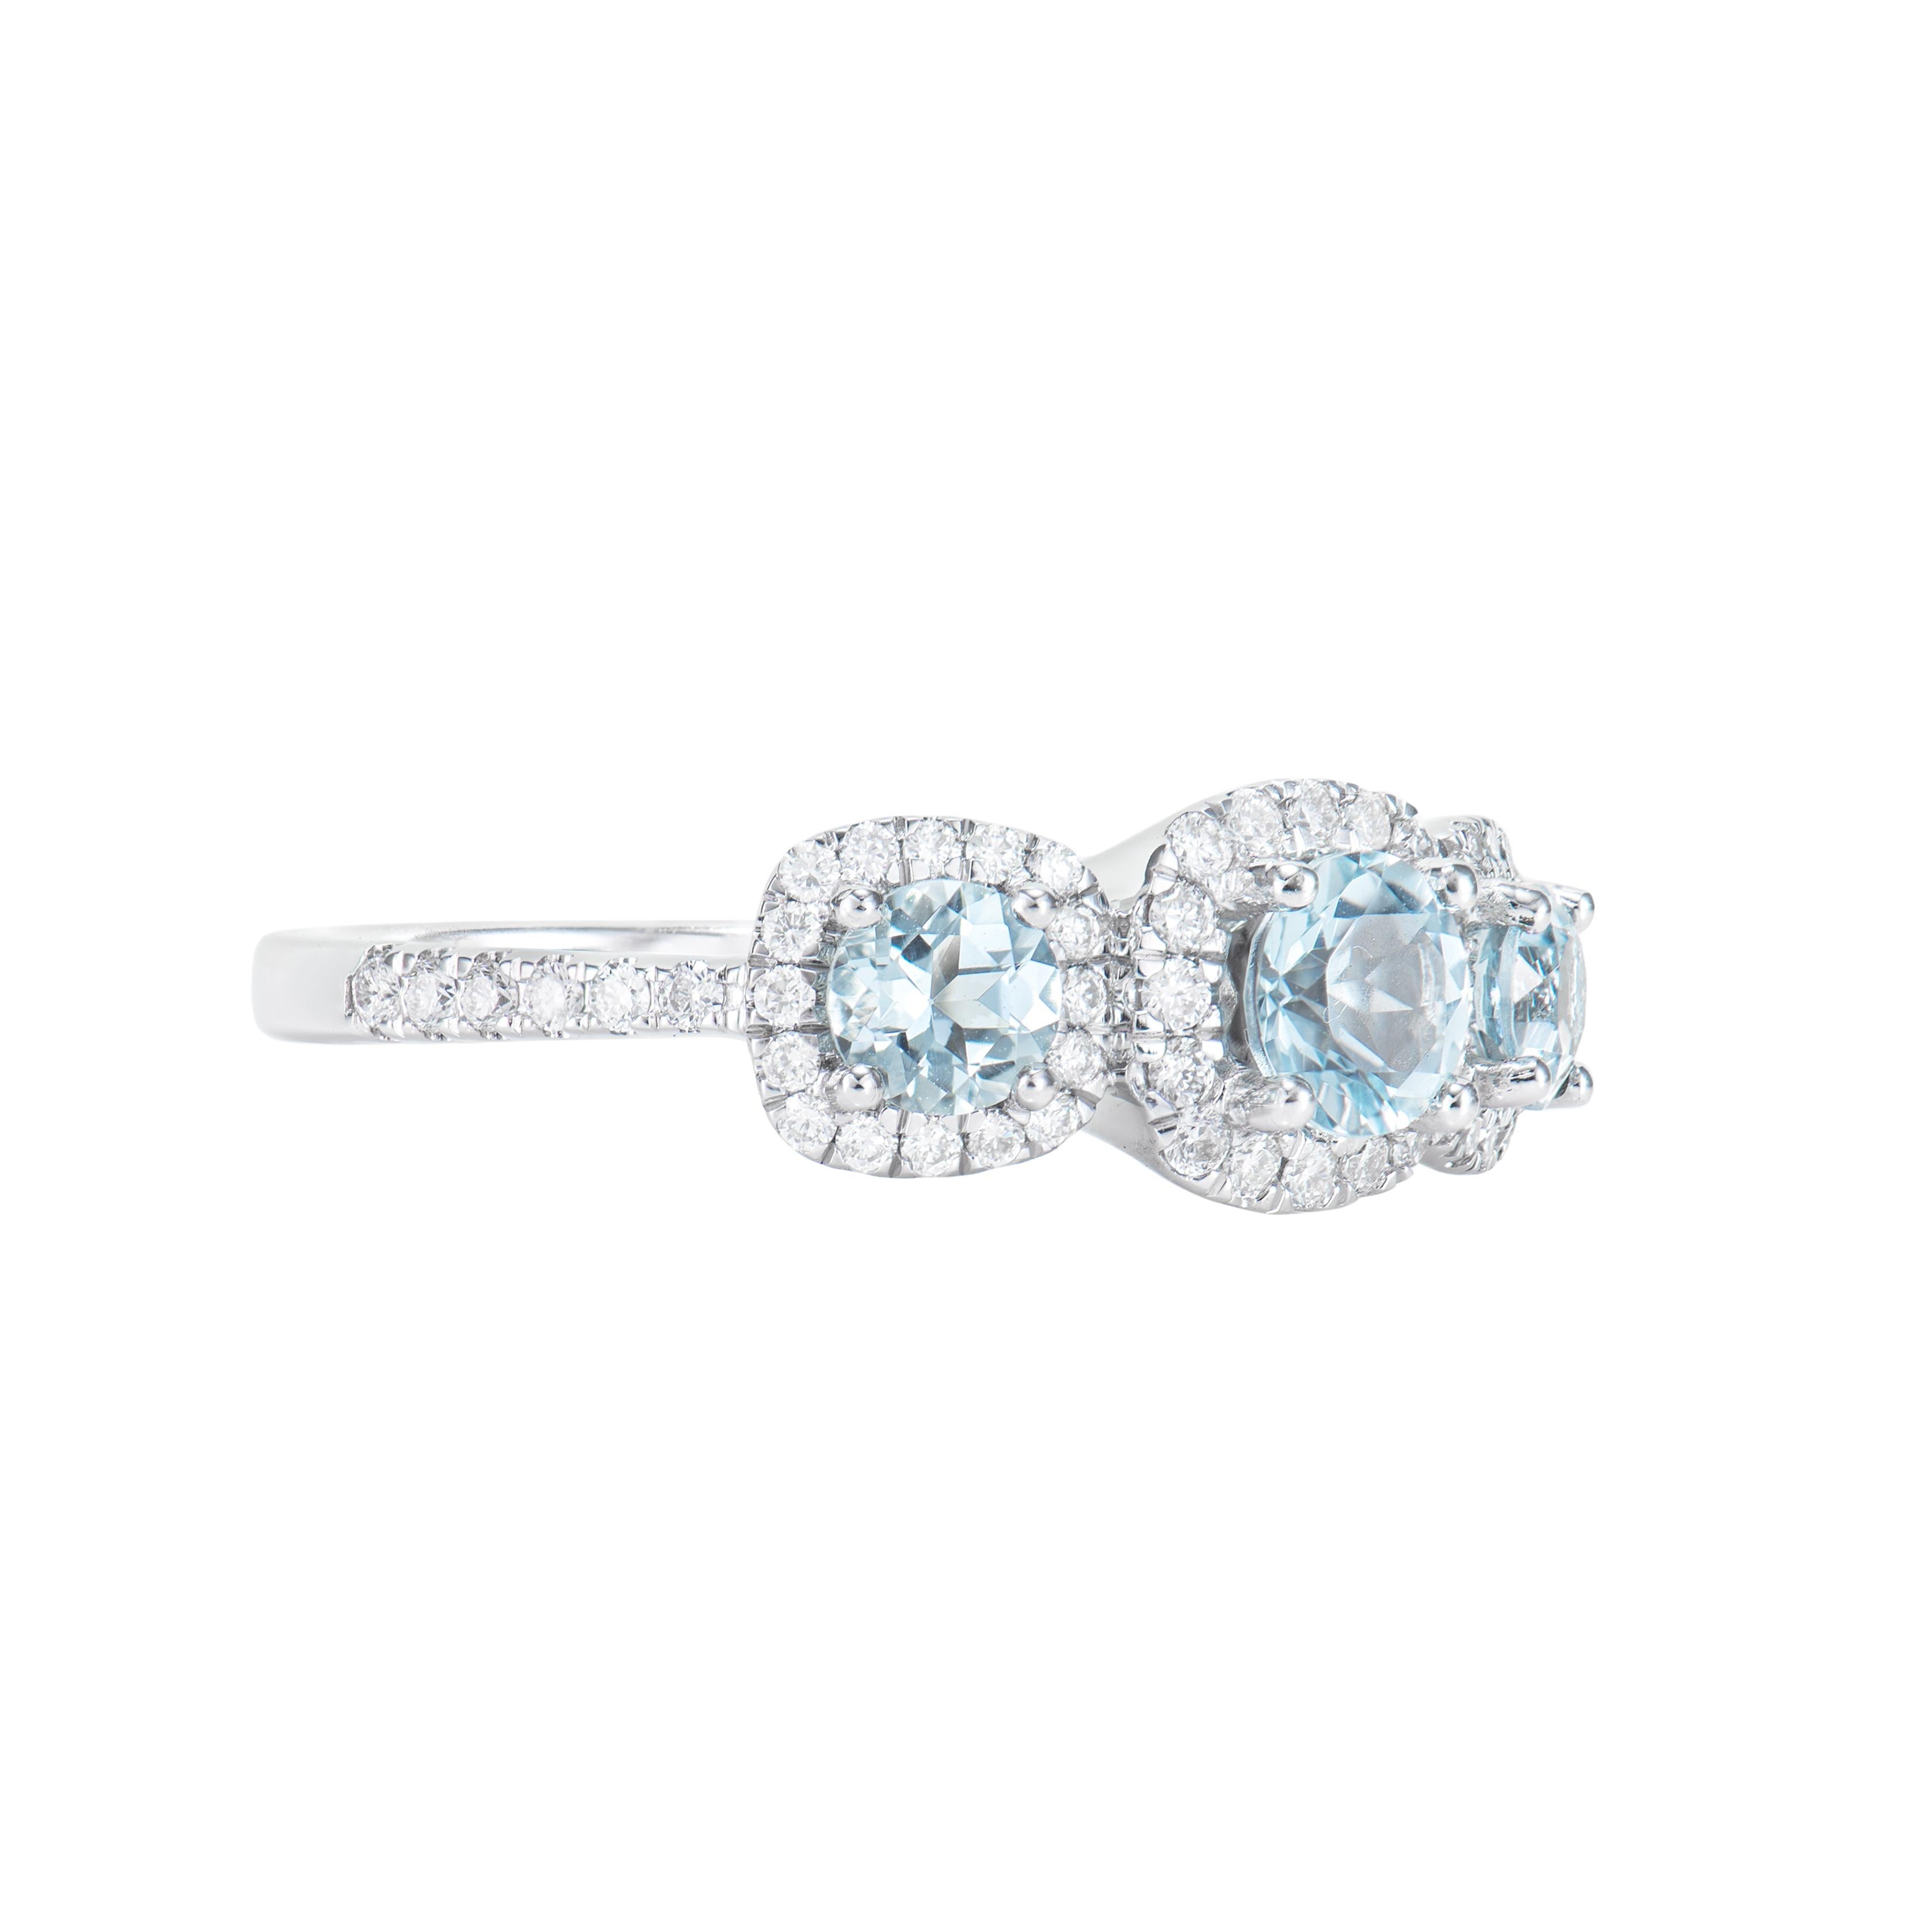 The Three Aquamarine stone ring is beautiful, unique, and perfect for anyone who wants a statement piece. Wear it as an everyday ring or stack it with other rings to create an entirely different look. Accented with Diamonds these rings are made in